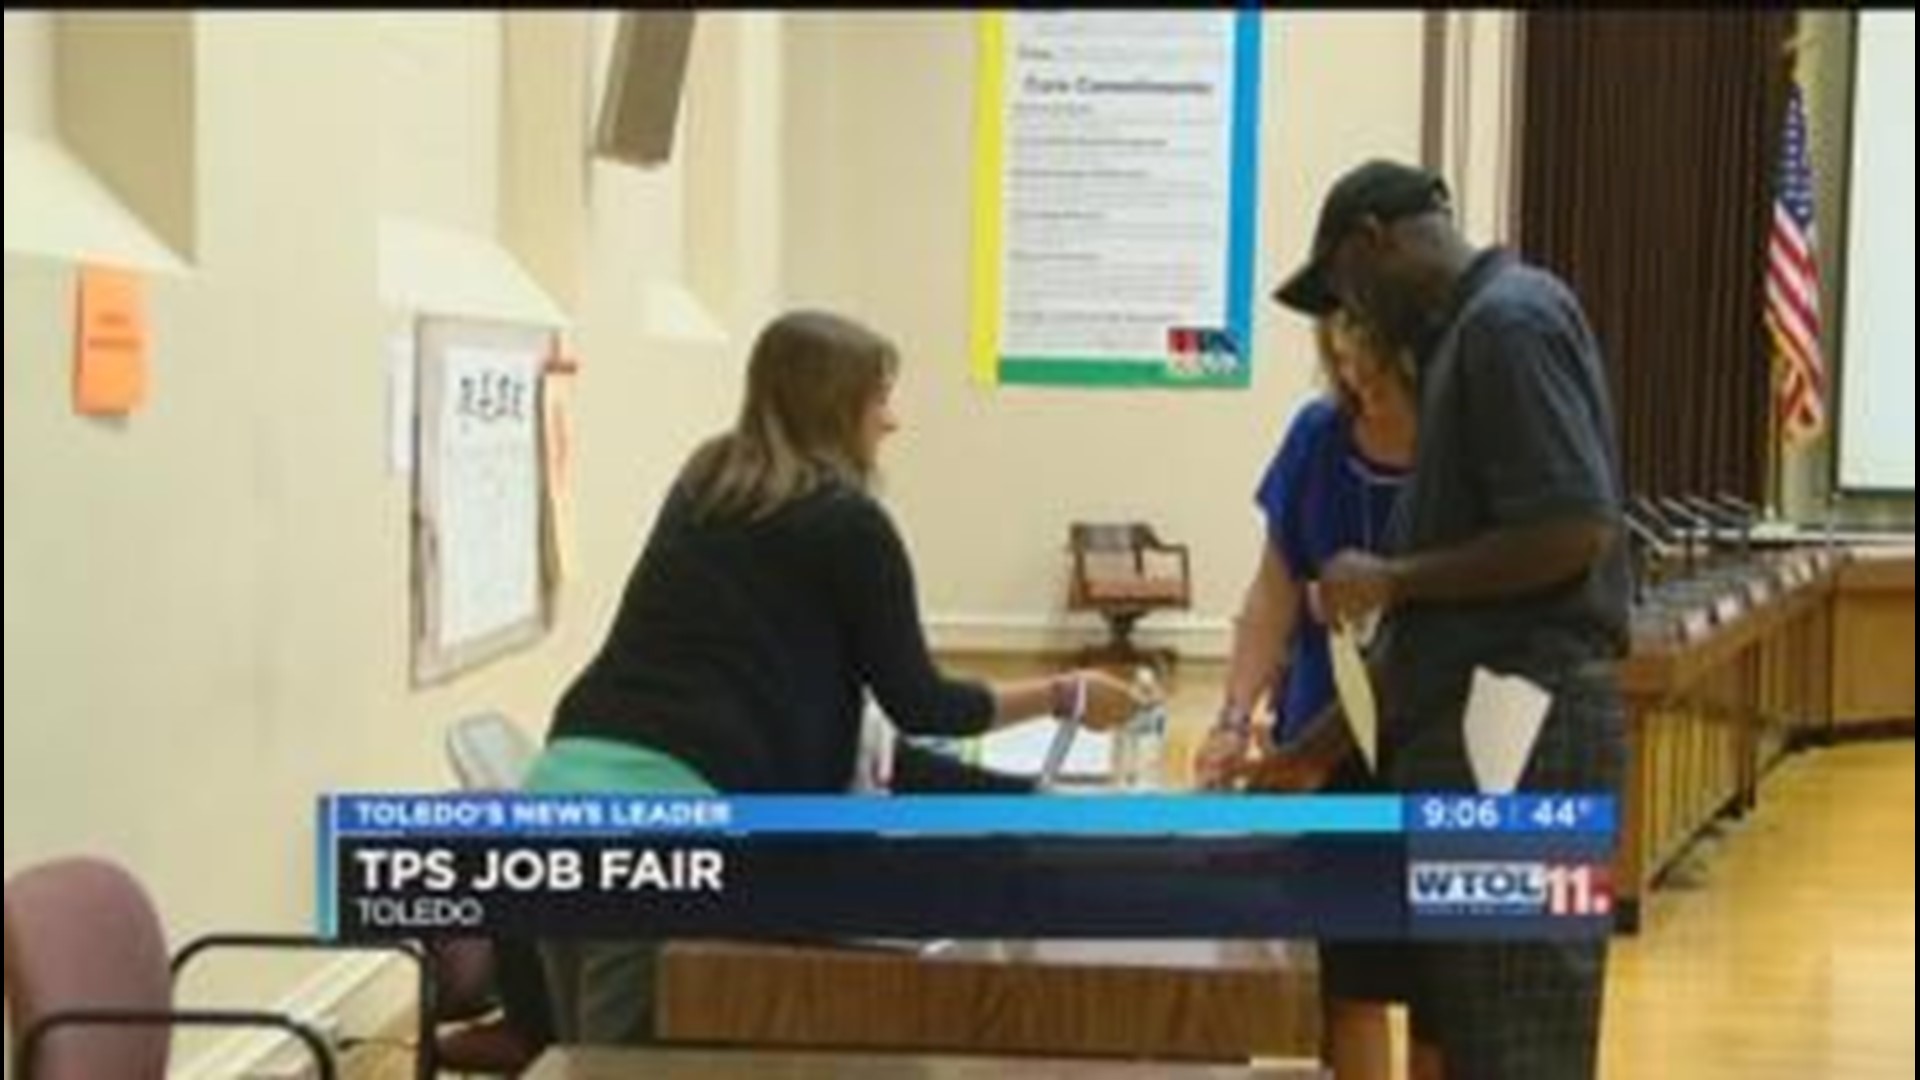 TPS is hosting job fair to hire various positions